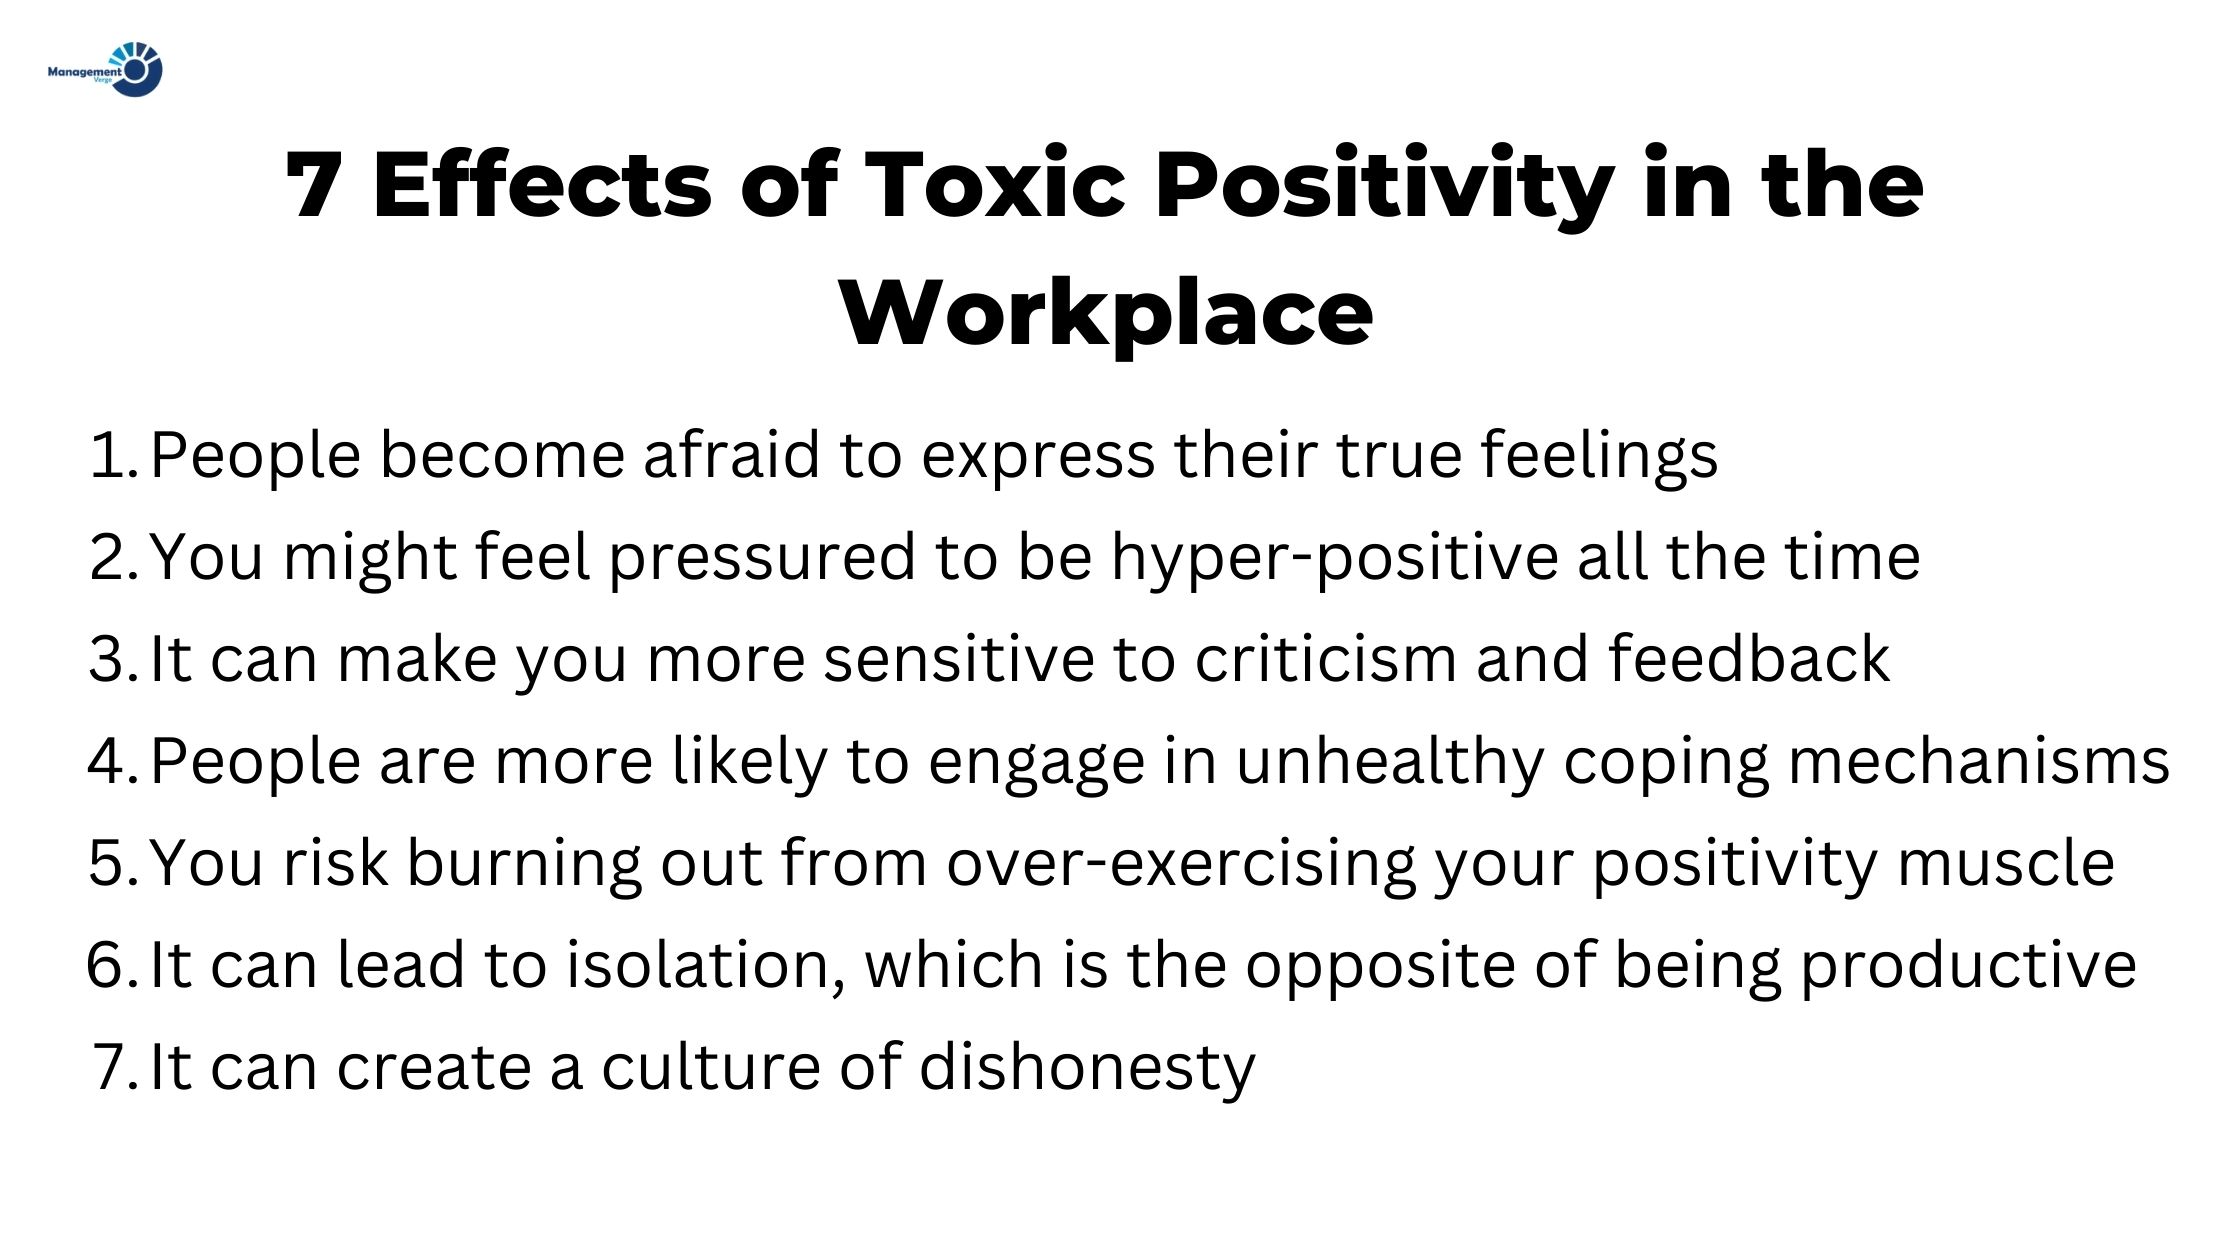 Effects of Toxic Positivity in the Workplace